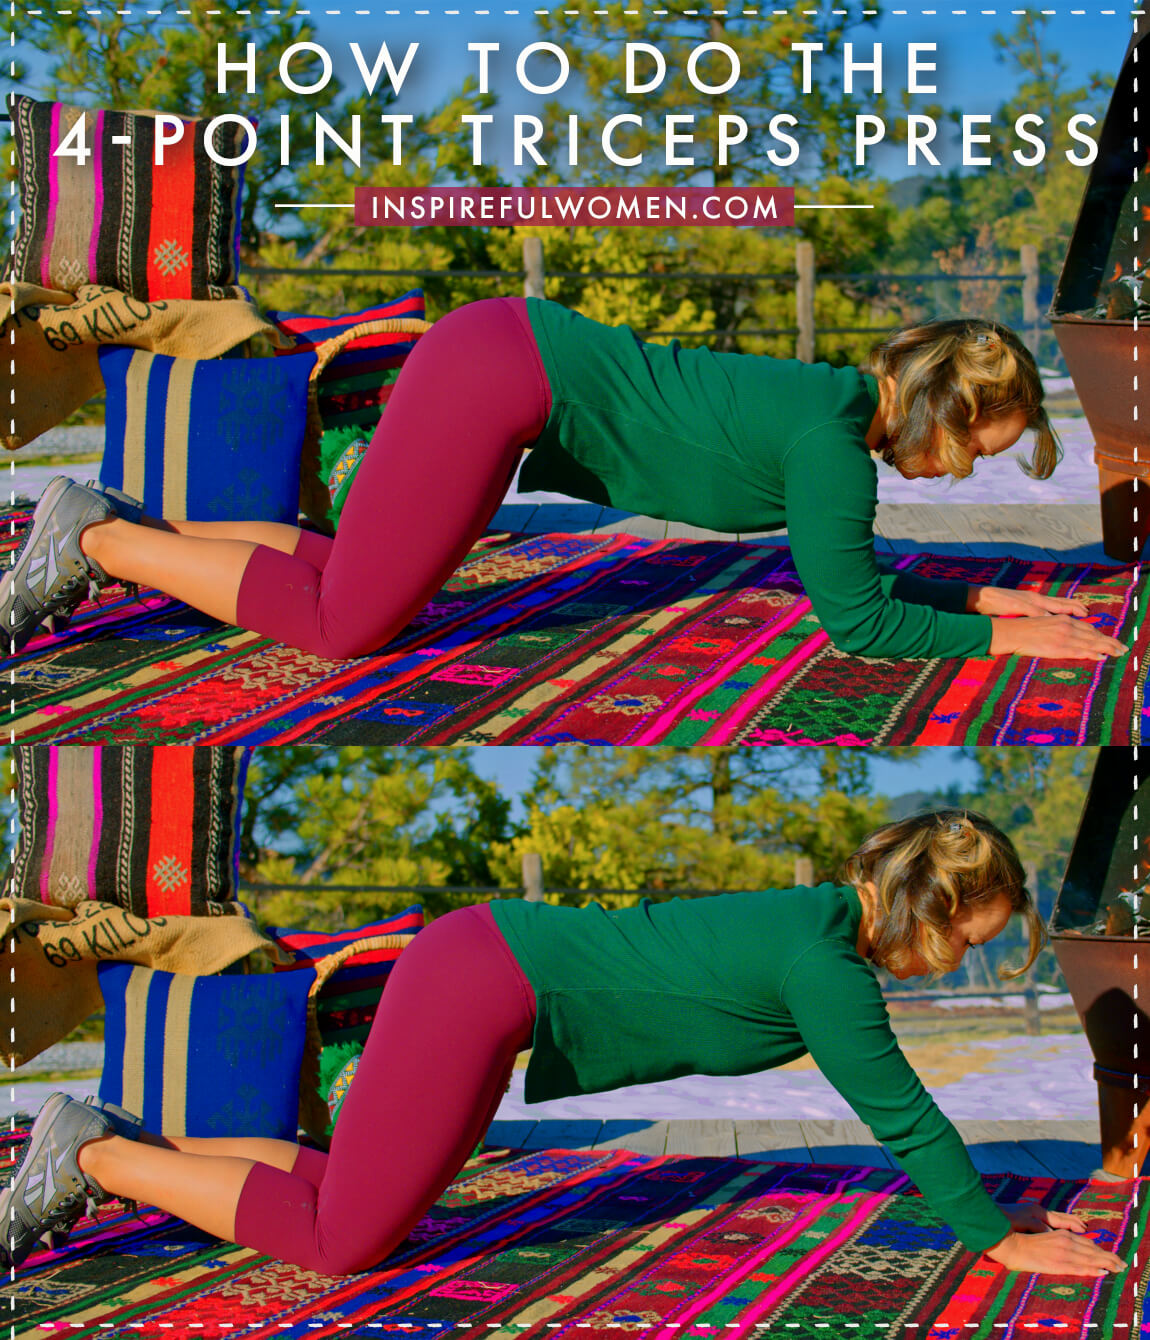 how-to-4-point-quadruped-triceps-press-bodyweight-arm-exercise-at-home-proper-form-side